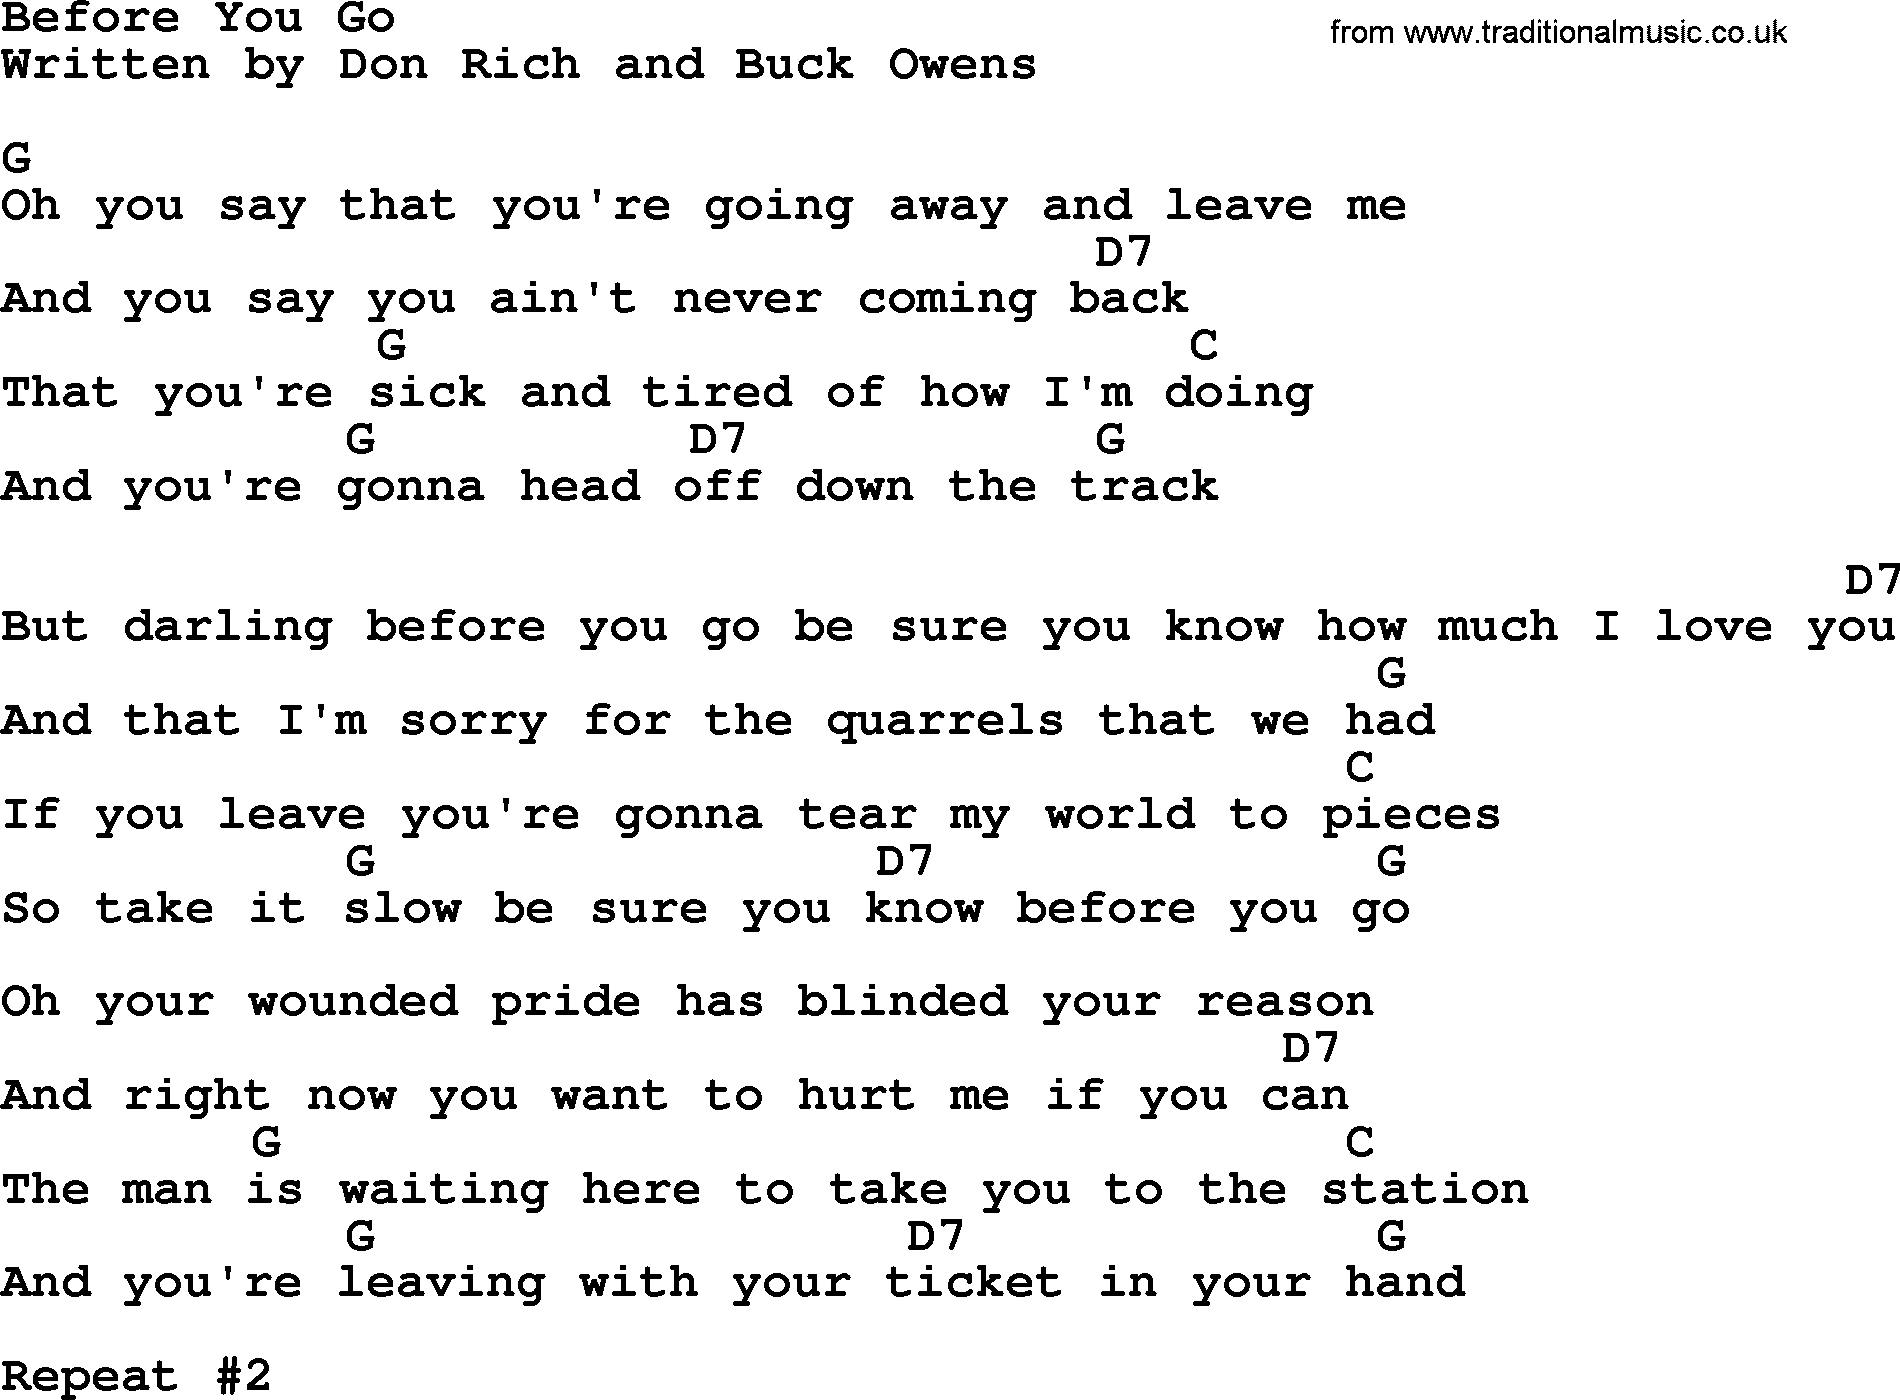 Bluegrass song: Before You Go, lyrics and chords